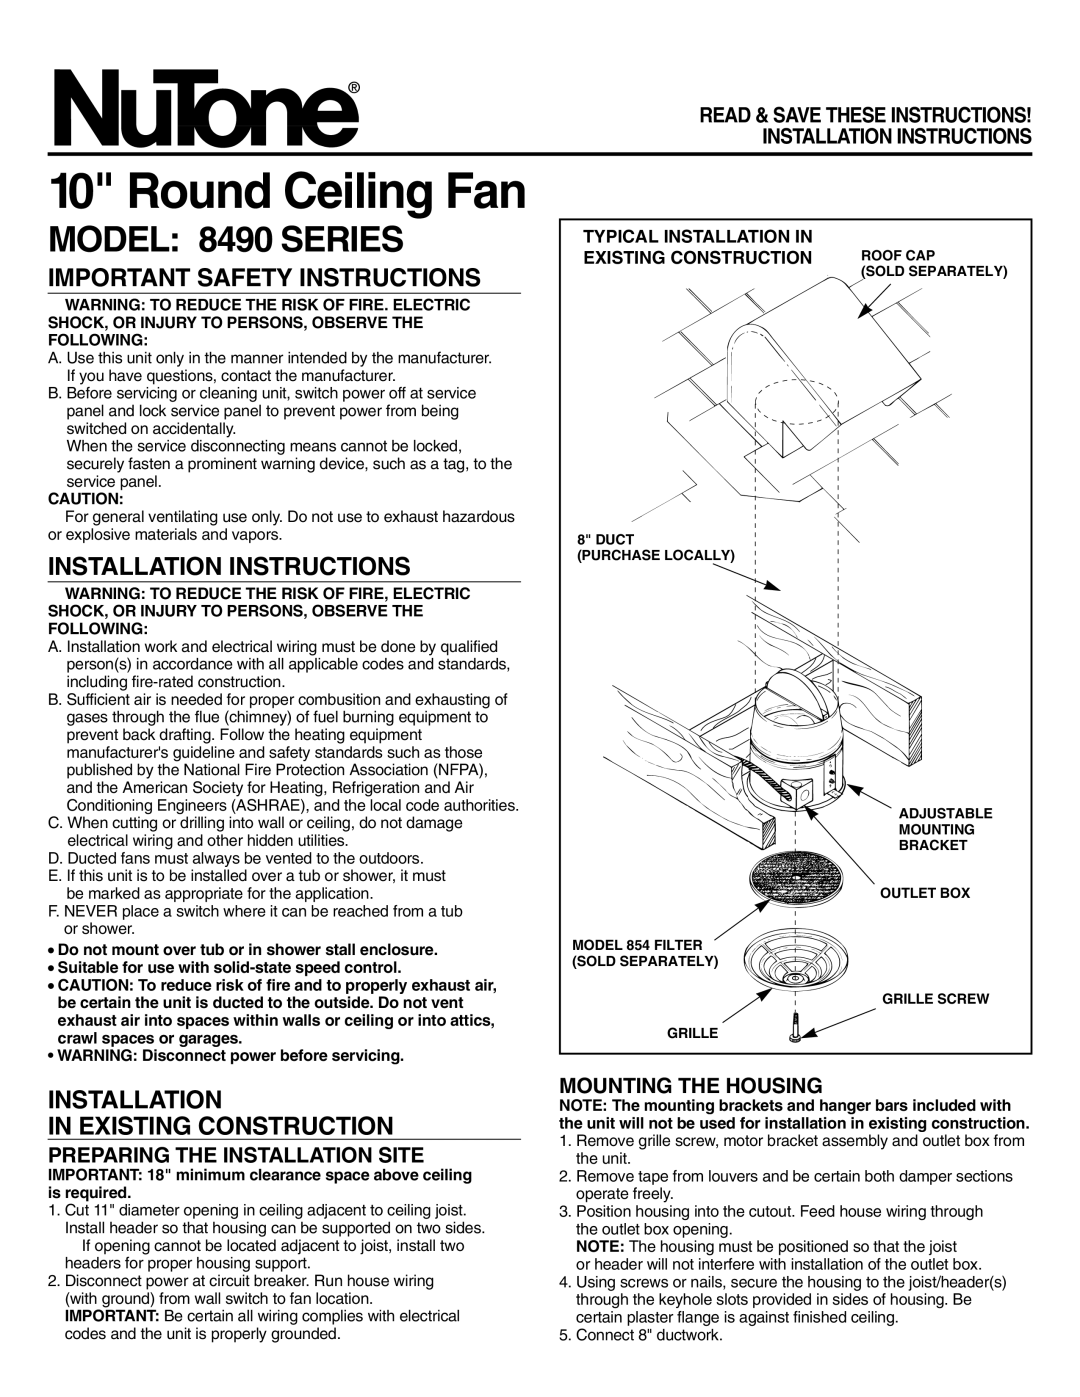 NuTone 8490 important safety instructions Important Safety Instructions, Installation Instructions, Mounting The Housing 